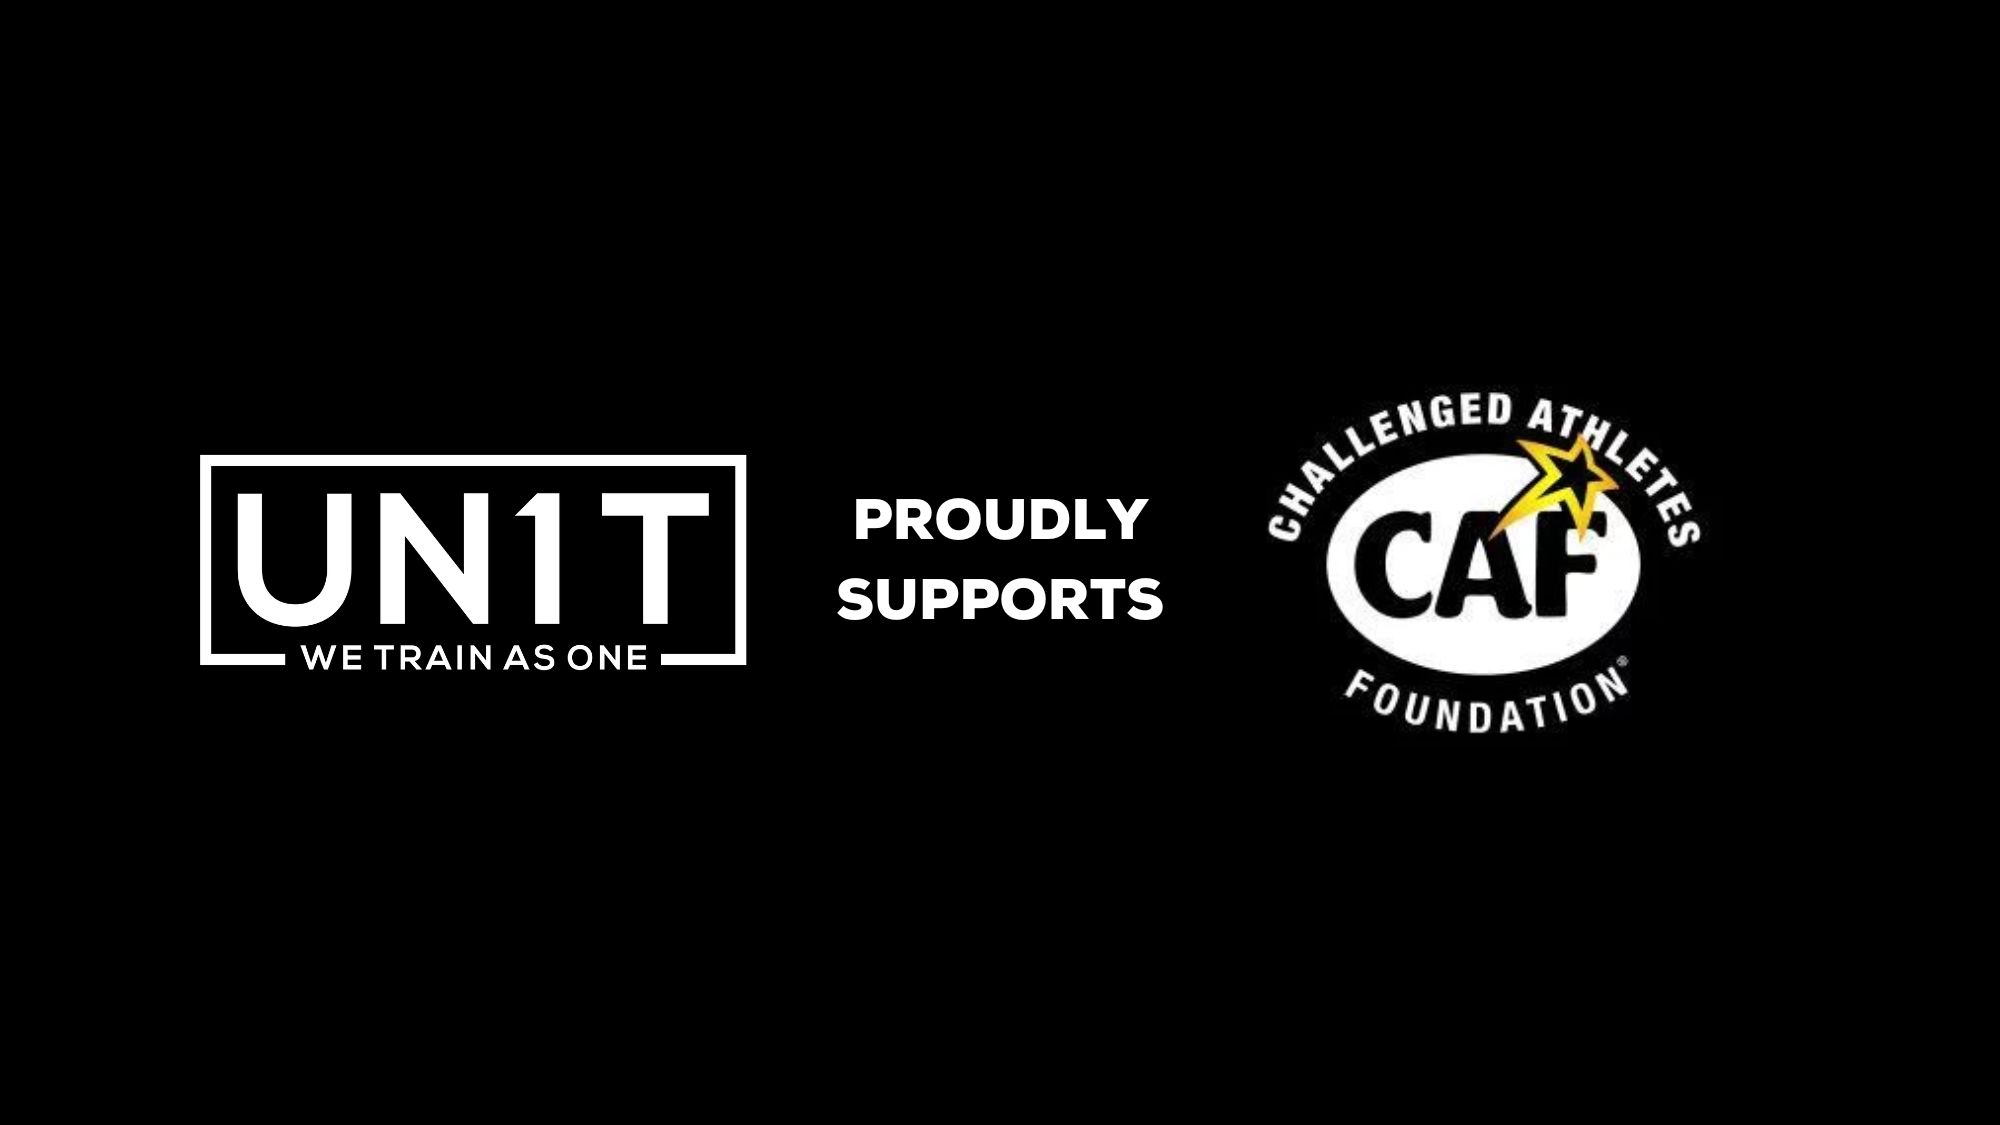 UN1T Proudly Supports the Challenged Athletes Foundation